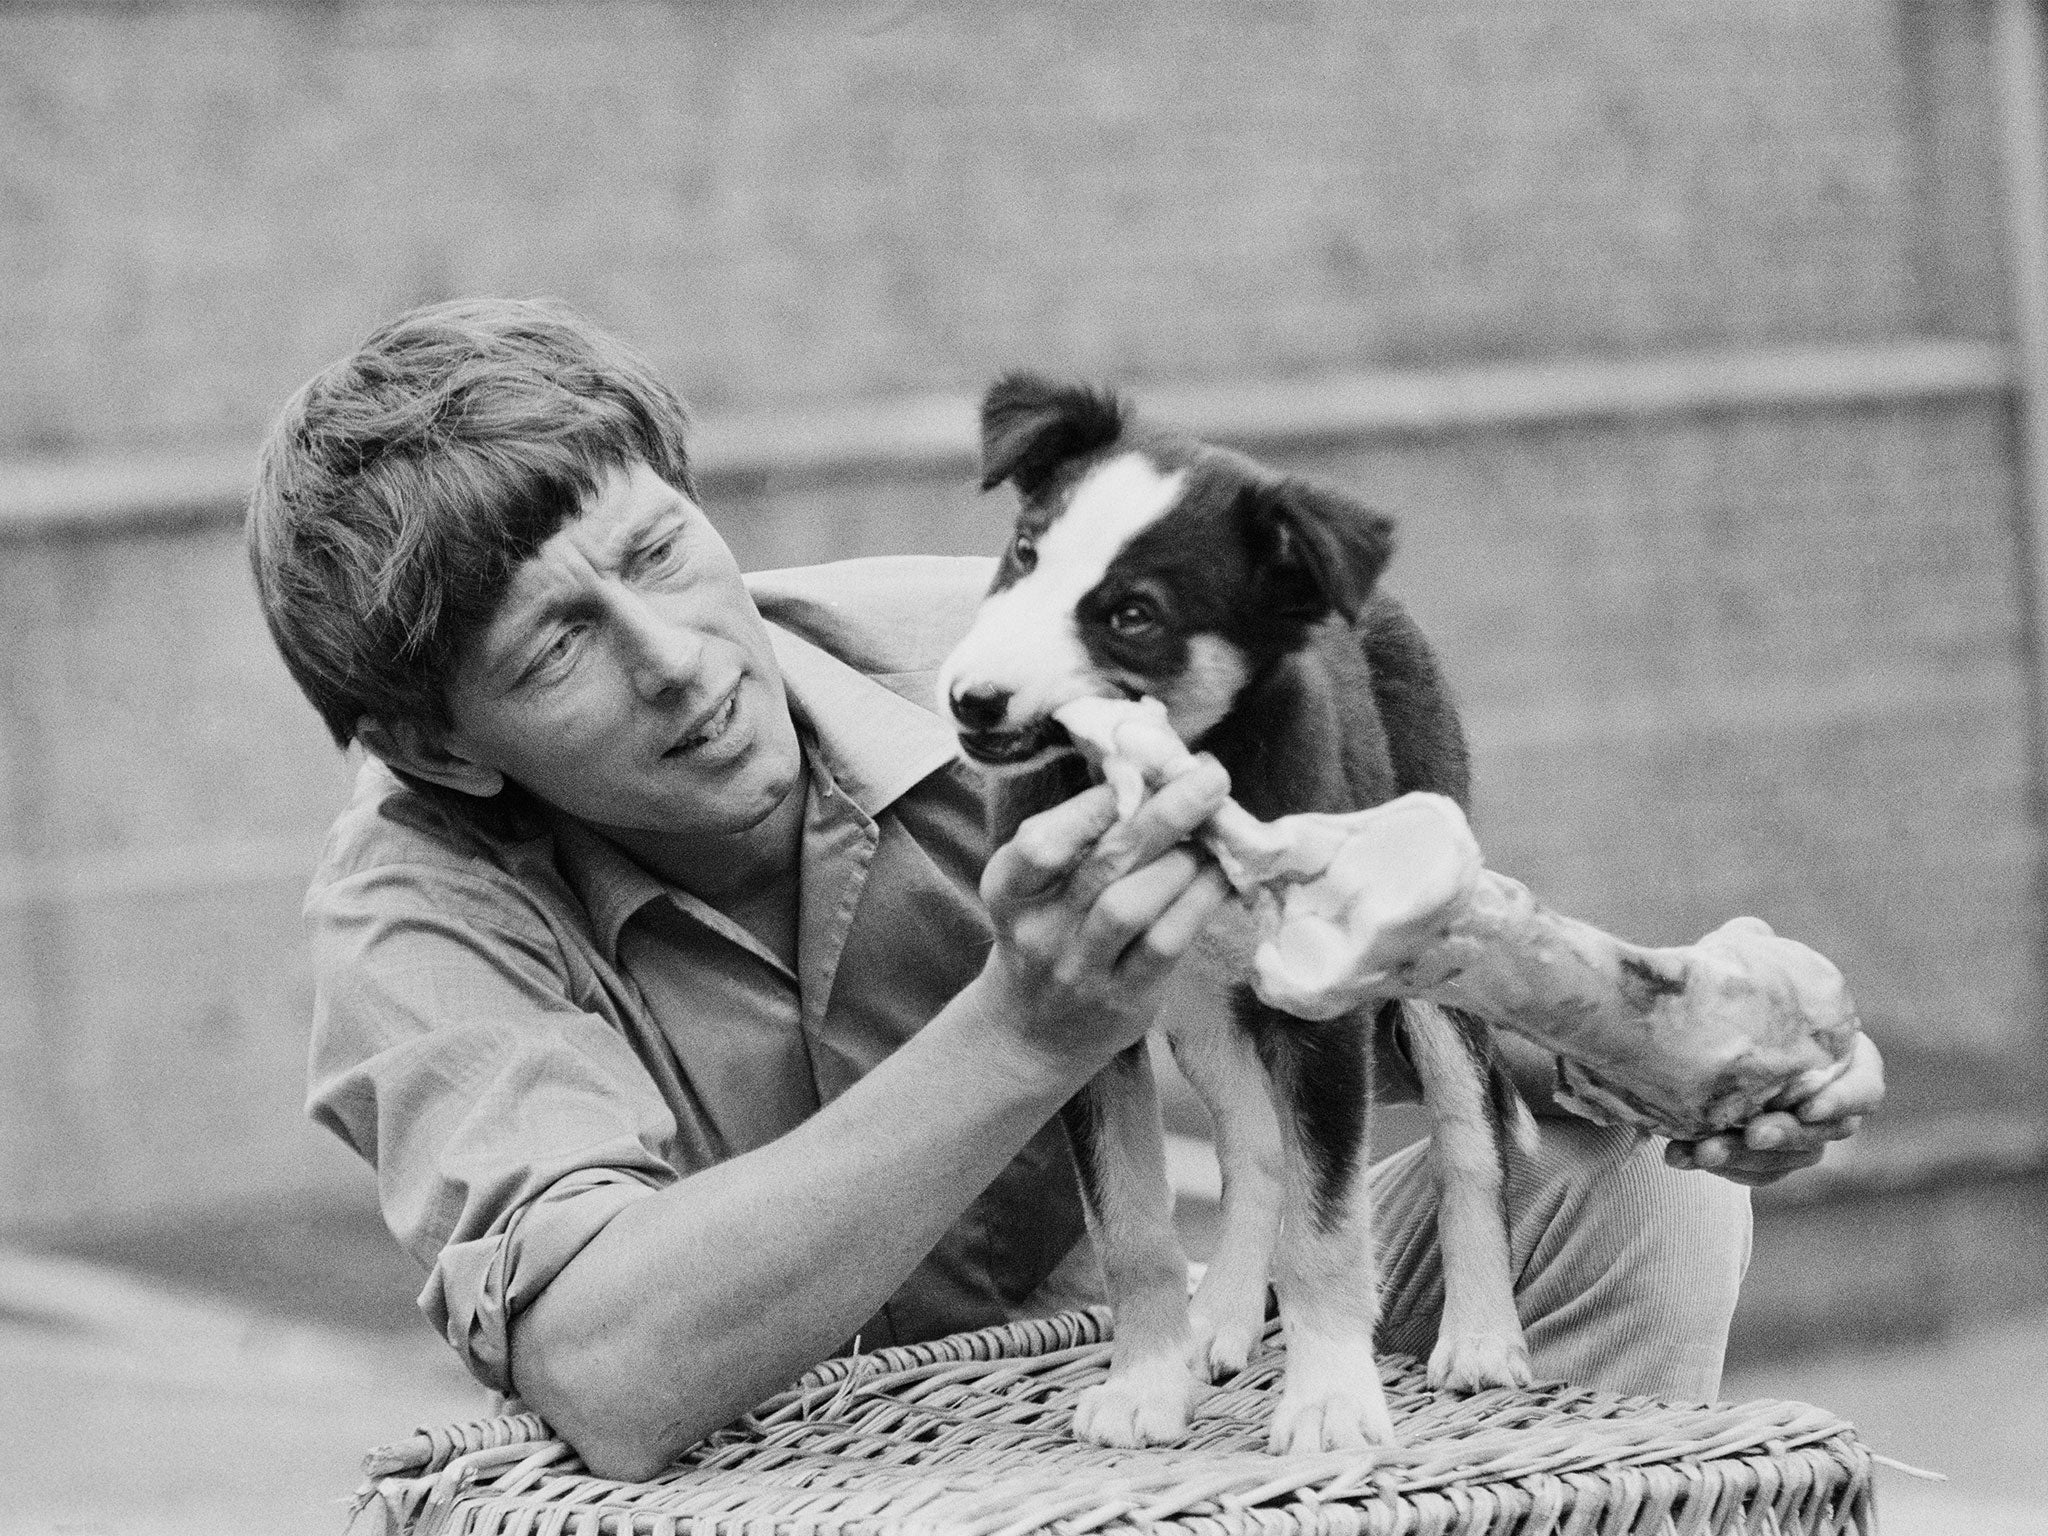 The television presenter was a hit with his border collie companion Shep, still a puppy in 1971